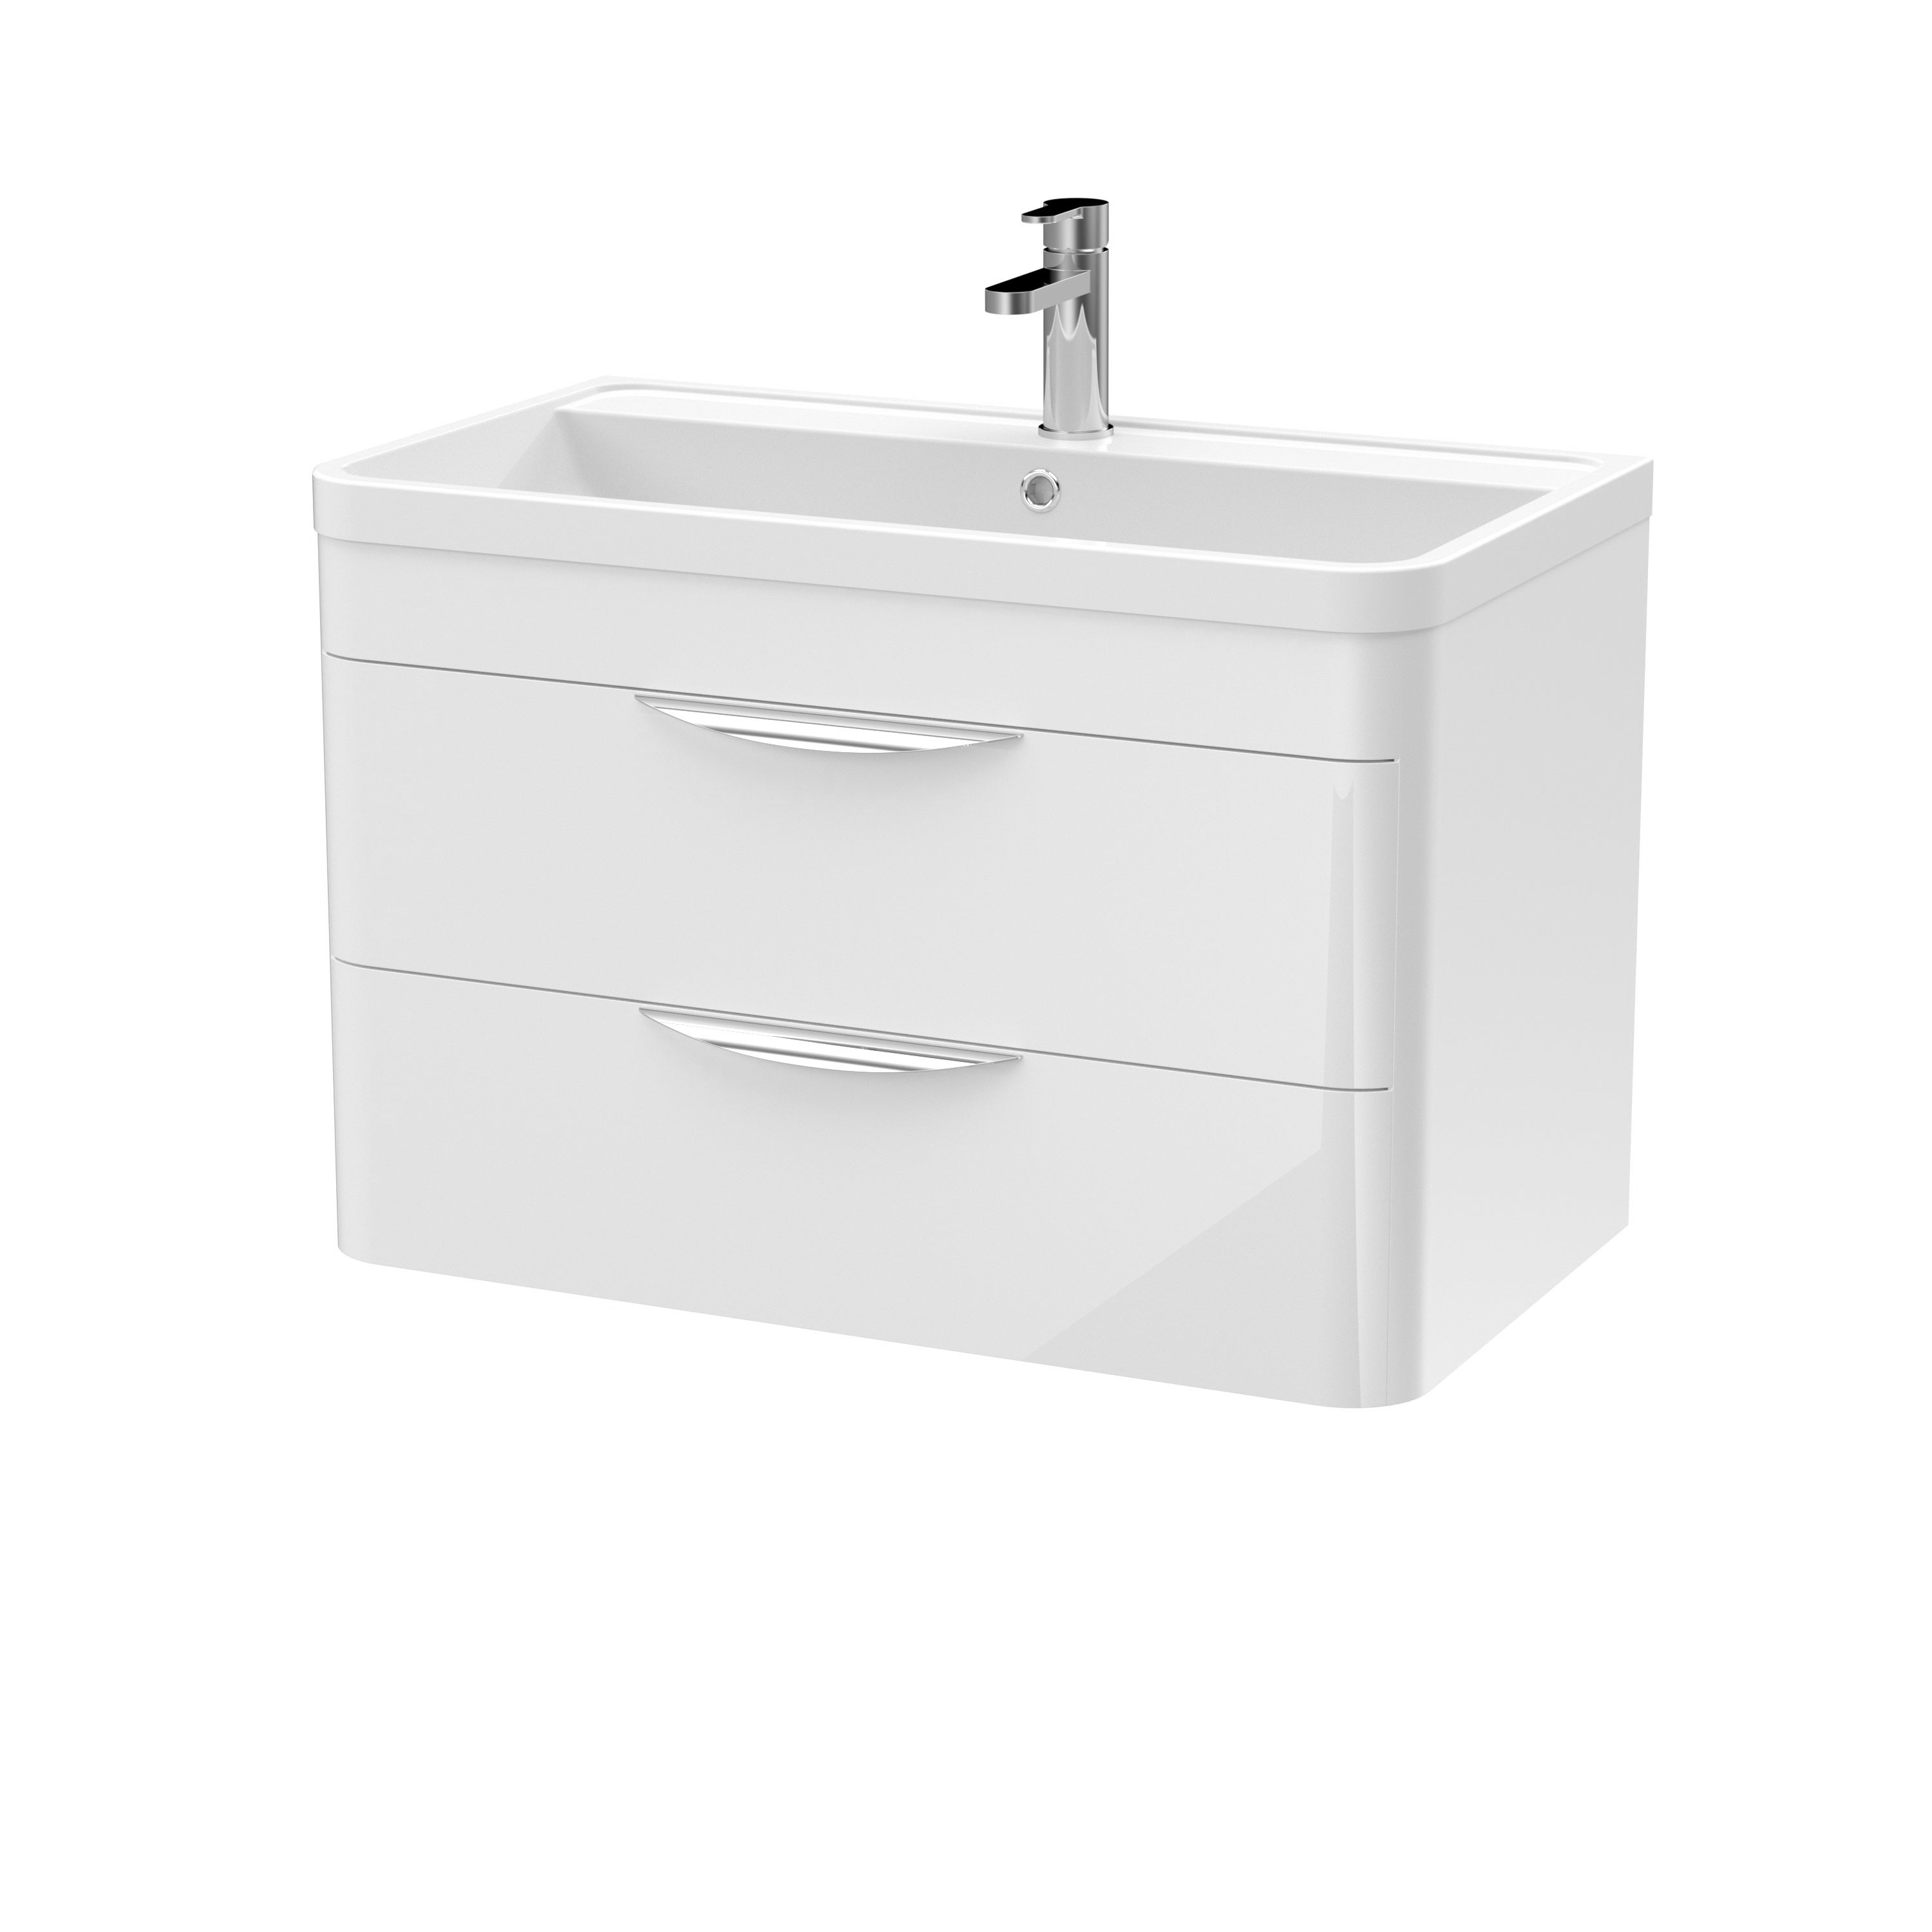 Parade Wall Mounted Vanity Unit with Polymarble Basin